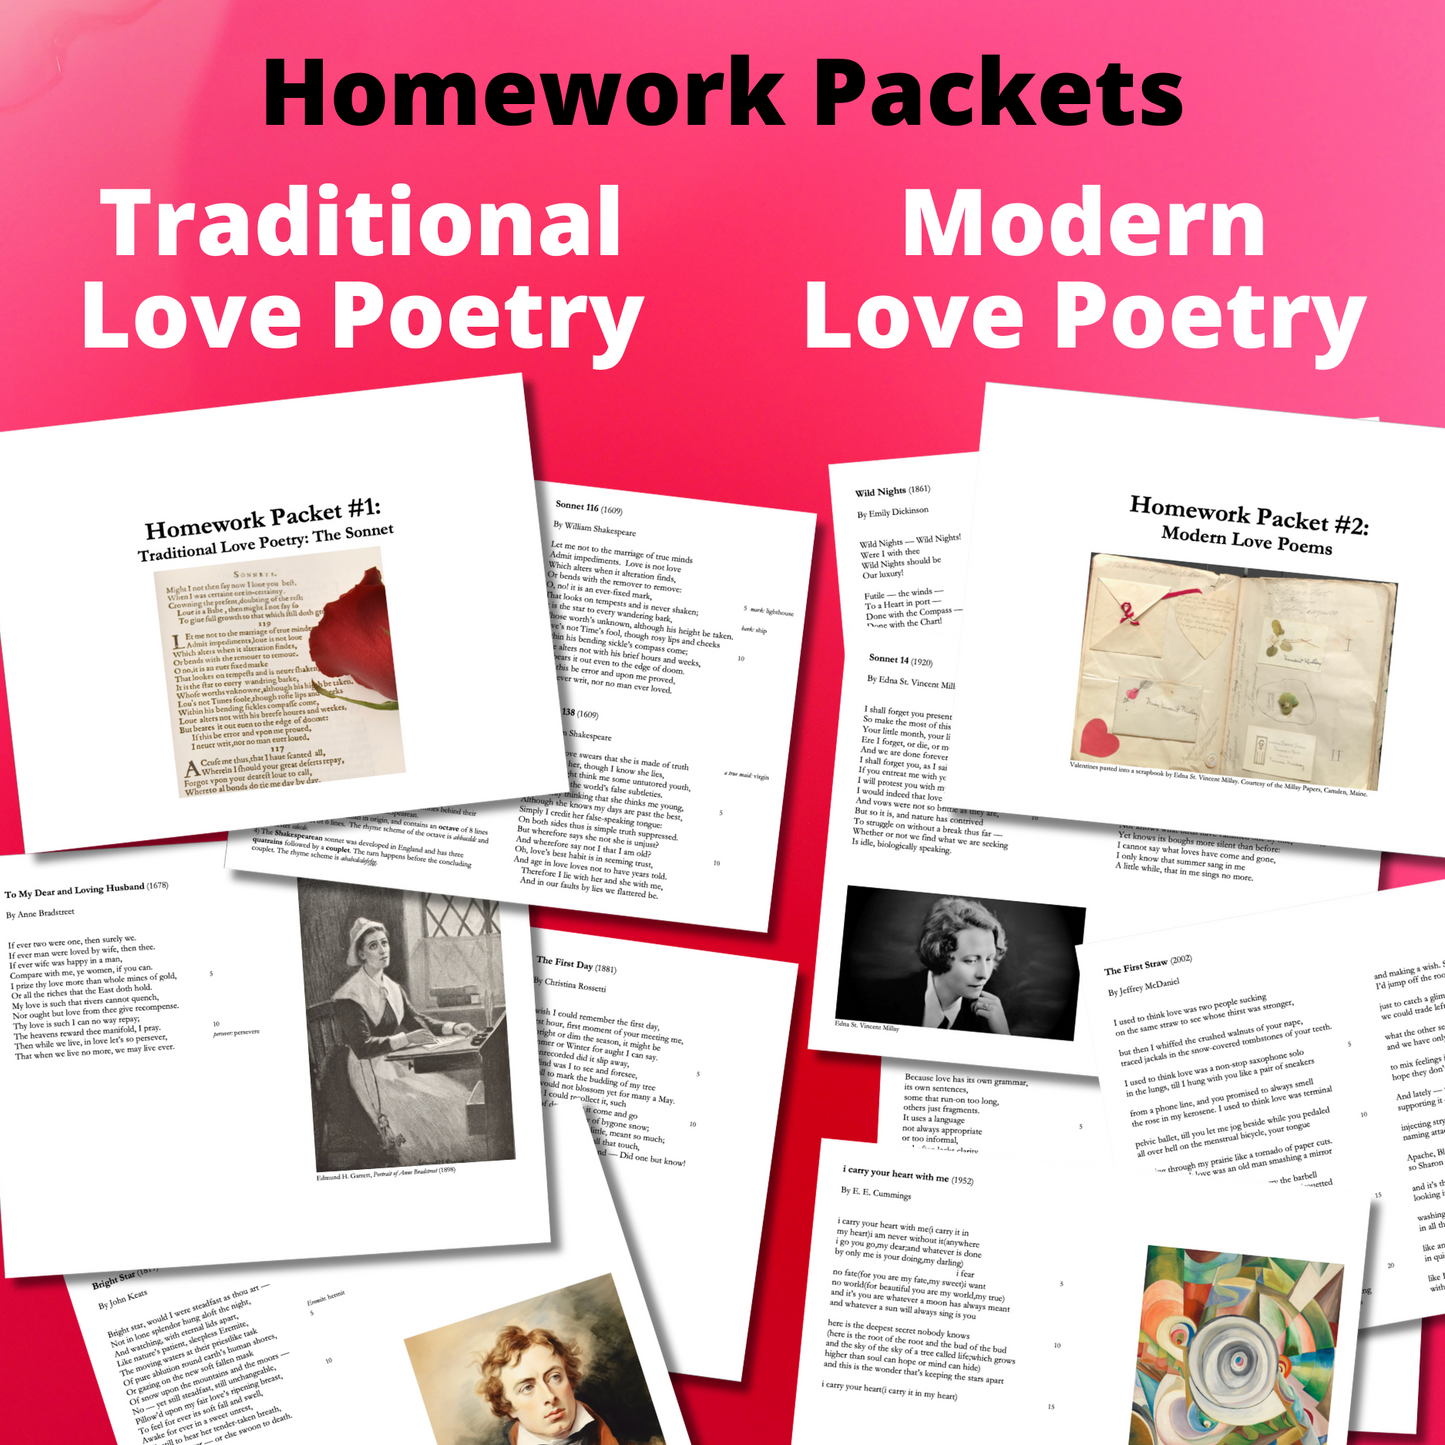 High School Poetry Unit: How to Analyze Poetic Imagery, Figurative Language, & More!